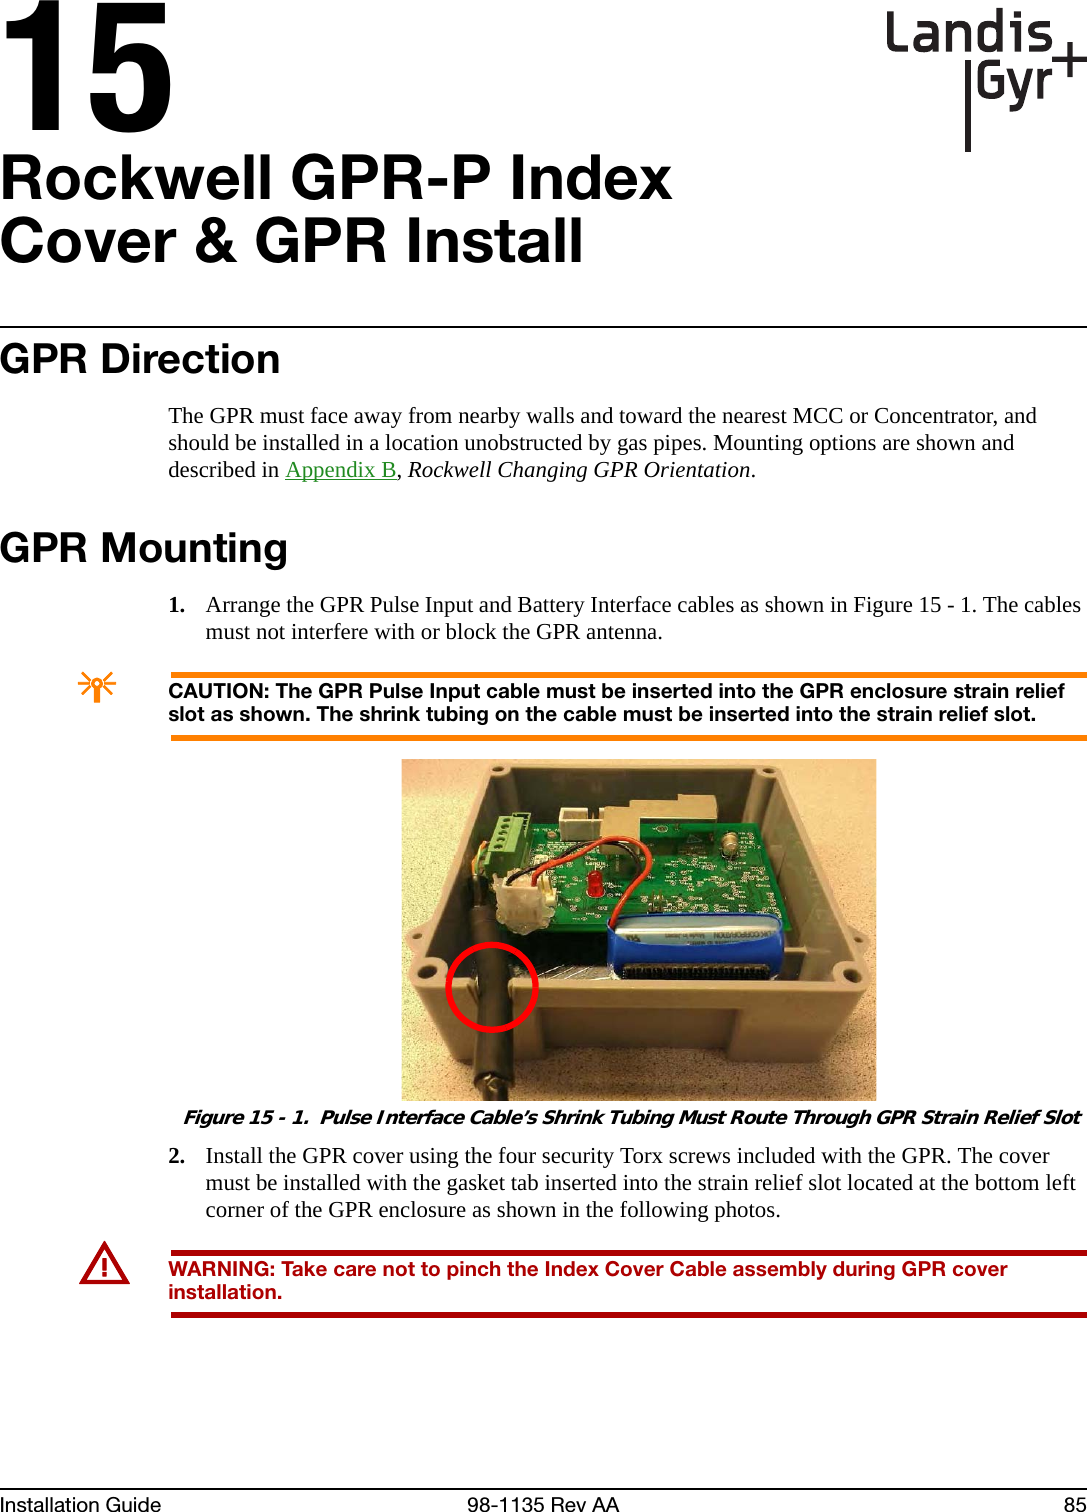 15Installation Guide 98-1135 Rev AA 85Rockwell GPR-P Index Cover &amp; GPR InstallGPR DirectionThe GPR must face away from nearby walls and toward the nearest MCC or Concentrator, and should be installed in a location unobstructed by gas pipes. Mounting options are shown and described in Appendix B, Rockwell Changing GPR Orientation.GPR Mounting1. Arrange the GPR Pulse Input and Battery Interface cables as shown in Figure 15 - 1. The cables must not interfere with or block the GPR antenna.ACAUTION: The GPR Pulse Input cable must be inserted into the GPR enclosure strain relief slot as shown. The shrink tubing on the cable must be inserted into the strain relief slot. Figure 15 - 1.  Pulse Interface Cable’s Shrink Tubing Must Route Through GPR Strain Relief Slot2. Install the GPR cover using the four security Torx screws included with the GPR. The cover must be installed with the gasket tab inserted into the strain relief slot located at the bottom left corner of the GPR enclosure as shown in the following photos.UWARNING: Take care not to pinch the Index Cover Cable assembly during GPR cover installation.